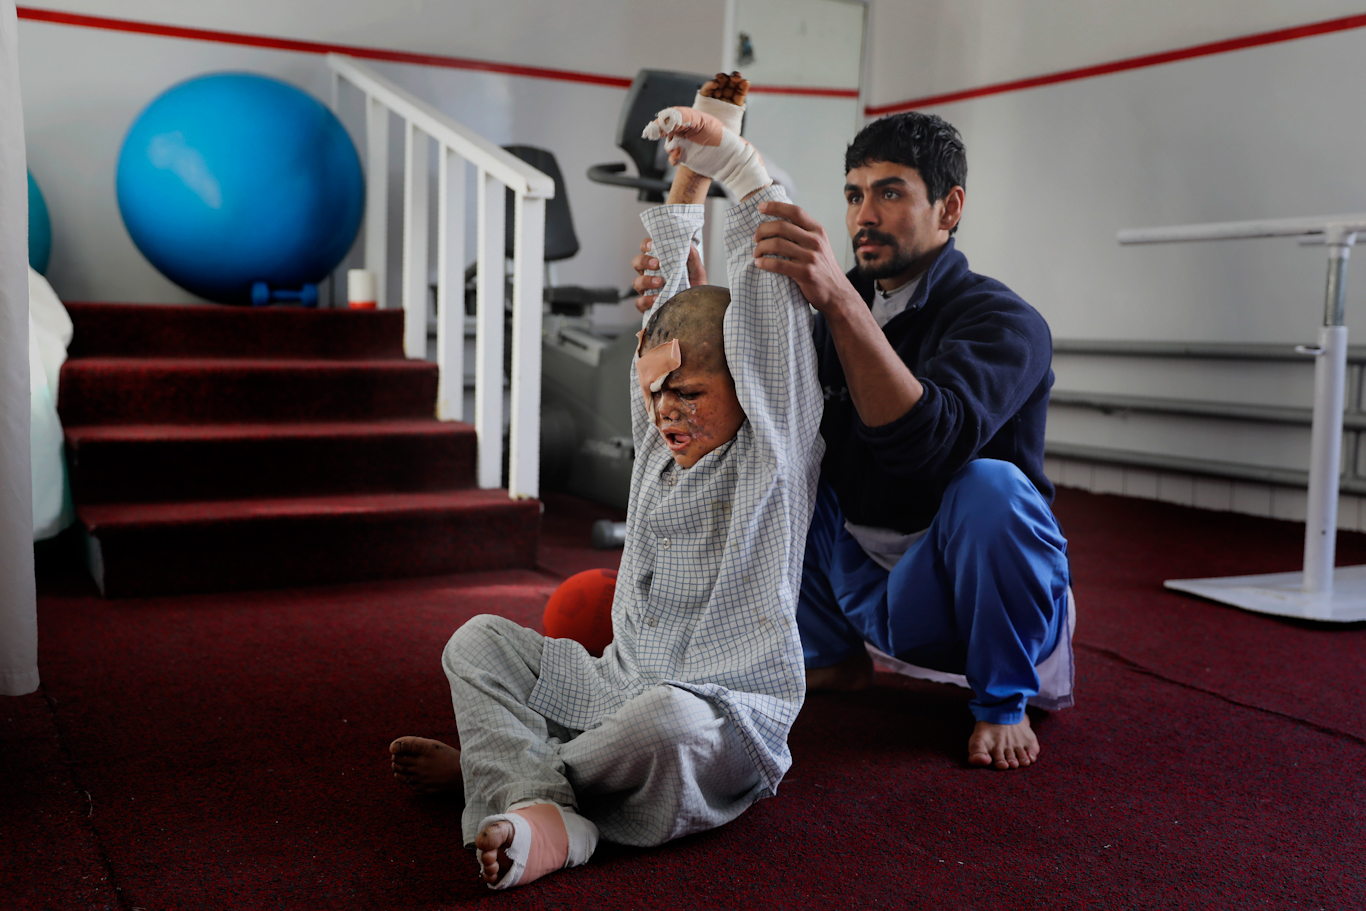 A physiotherapist helps nine-year-old Eimal, who has lost his right eye and several fingers on his hands in a landmine blast, stretch at Emergency Surgical Center for Civilian War Victims in Kabul, Afghanistan, Dec. 5, 2019. Altaf Qadri | AP